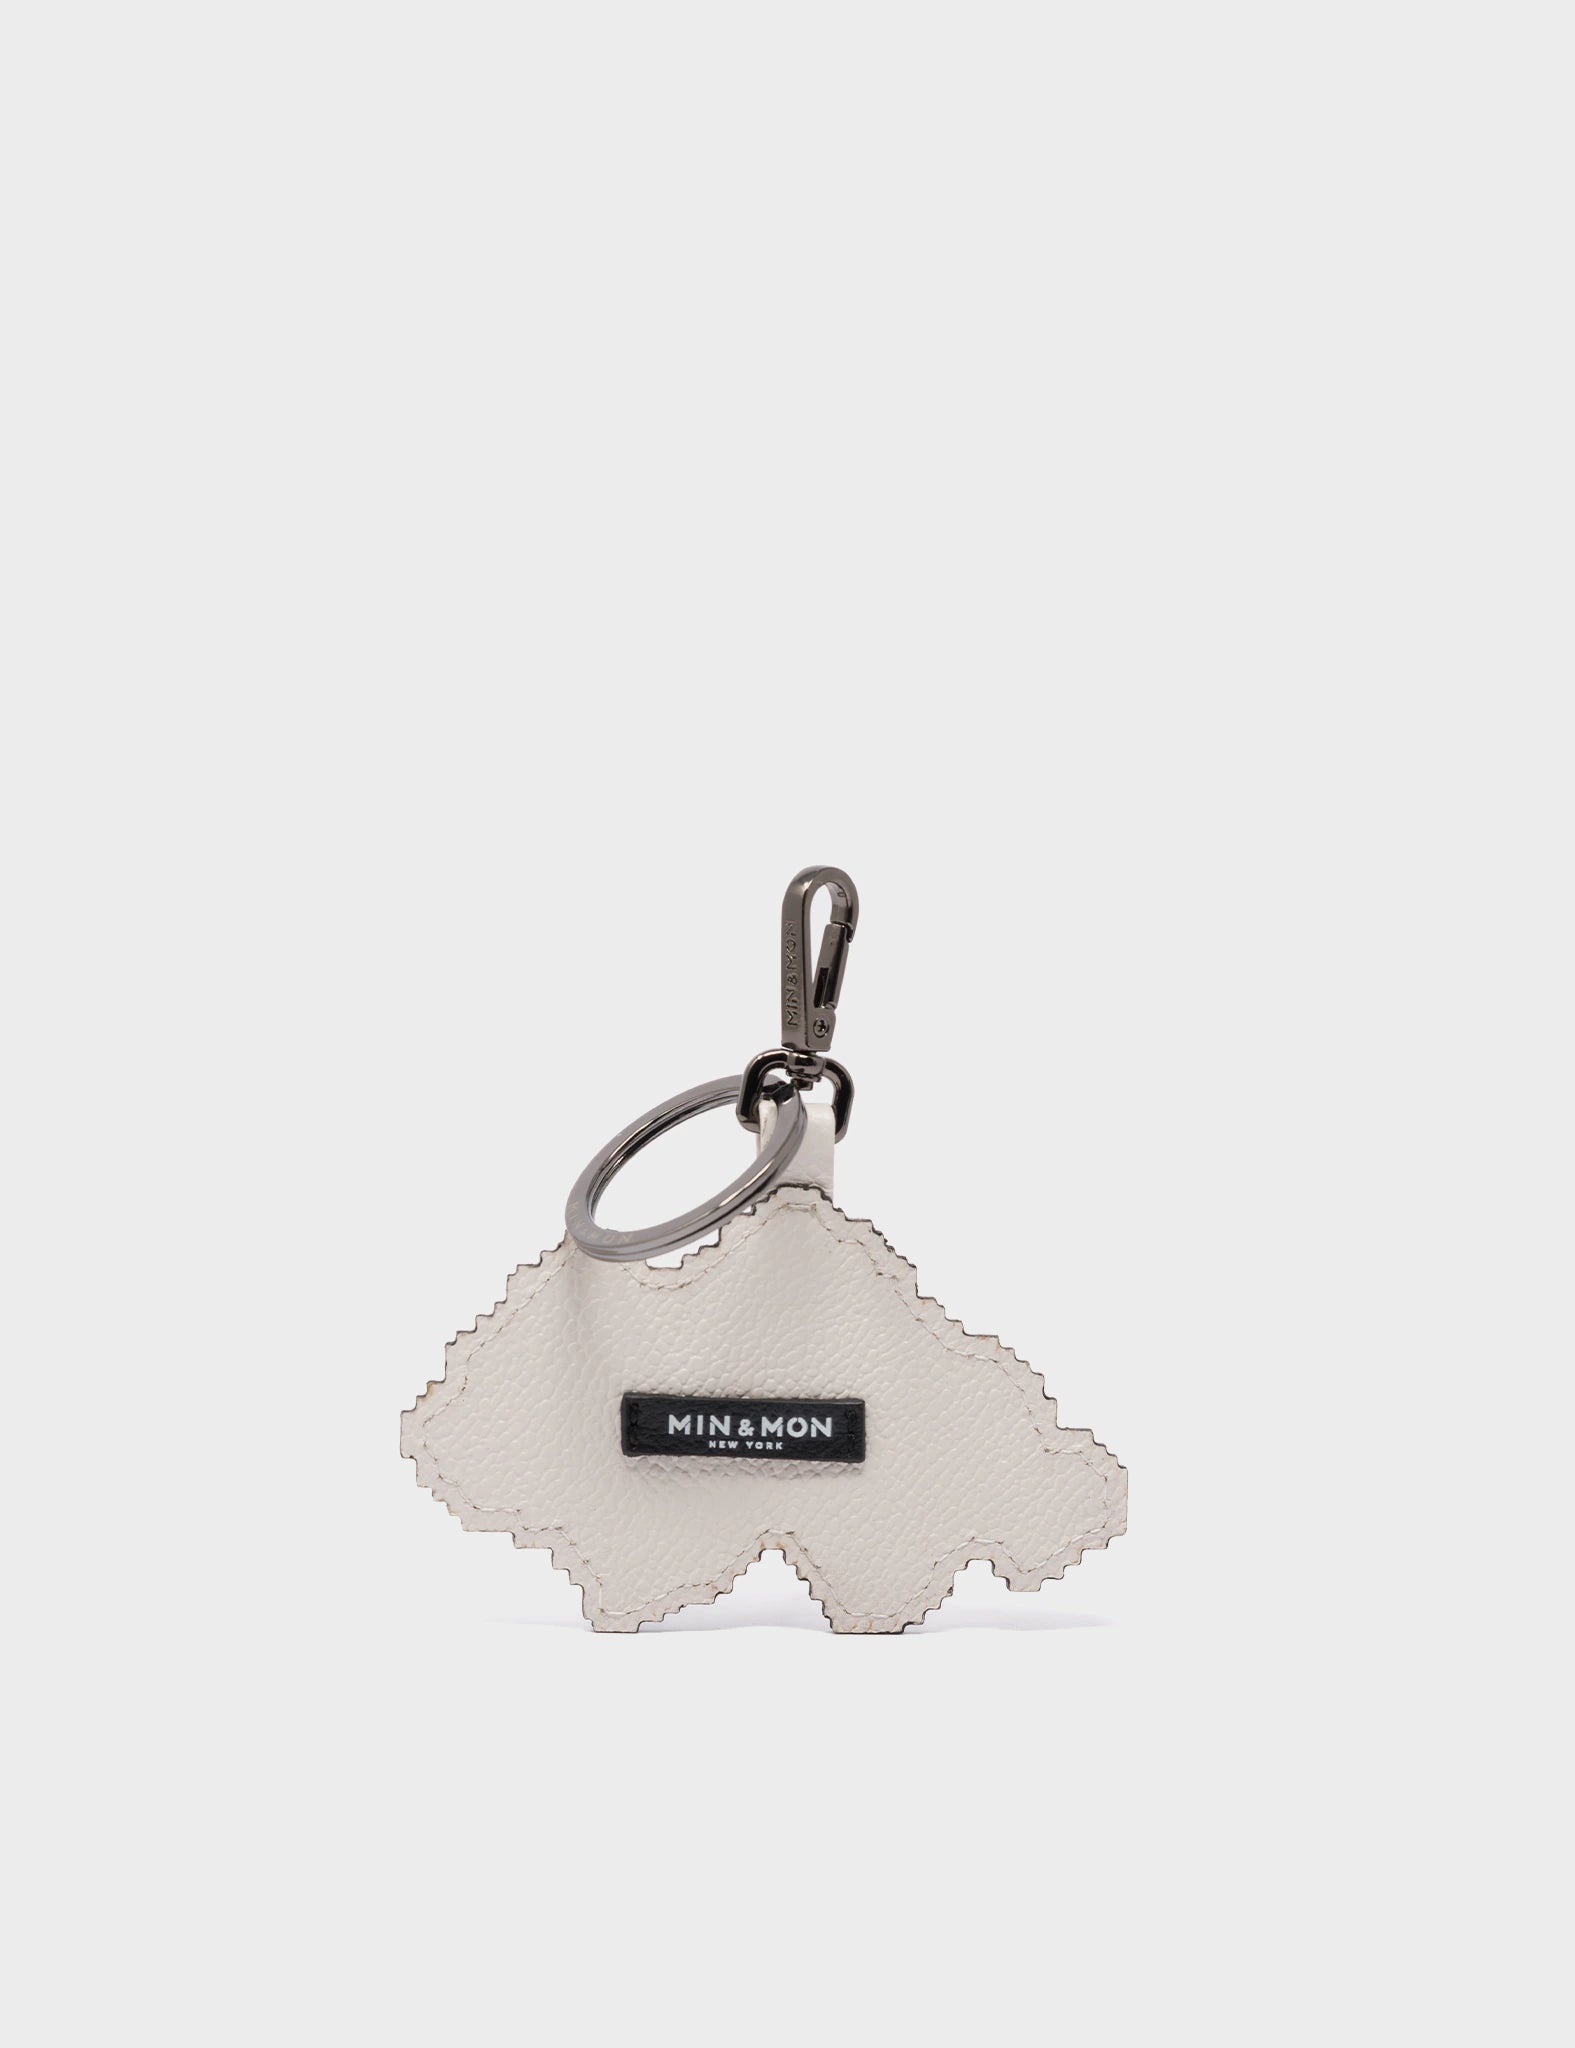 Pixel Cloud Charm - Cream Leather Keychain - Back View